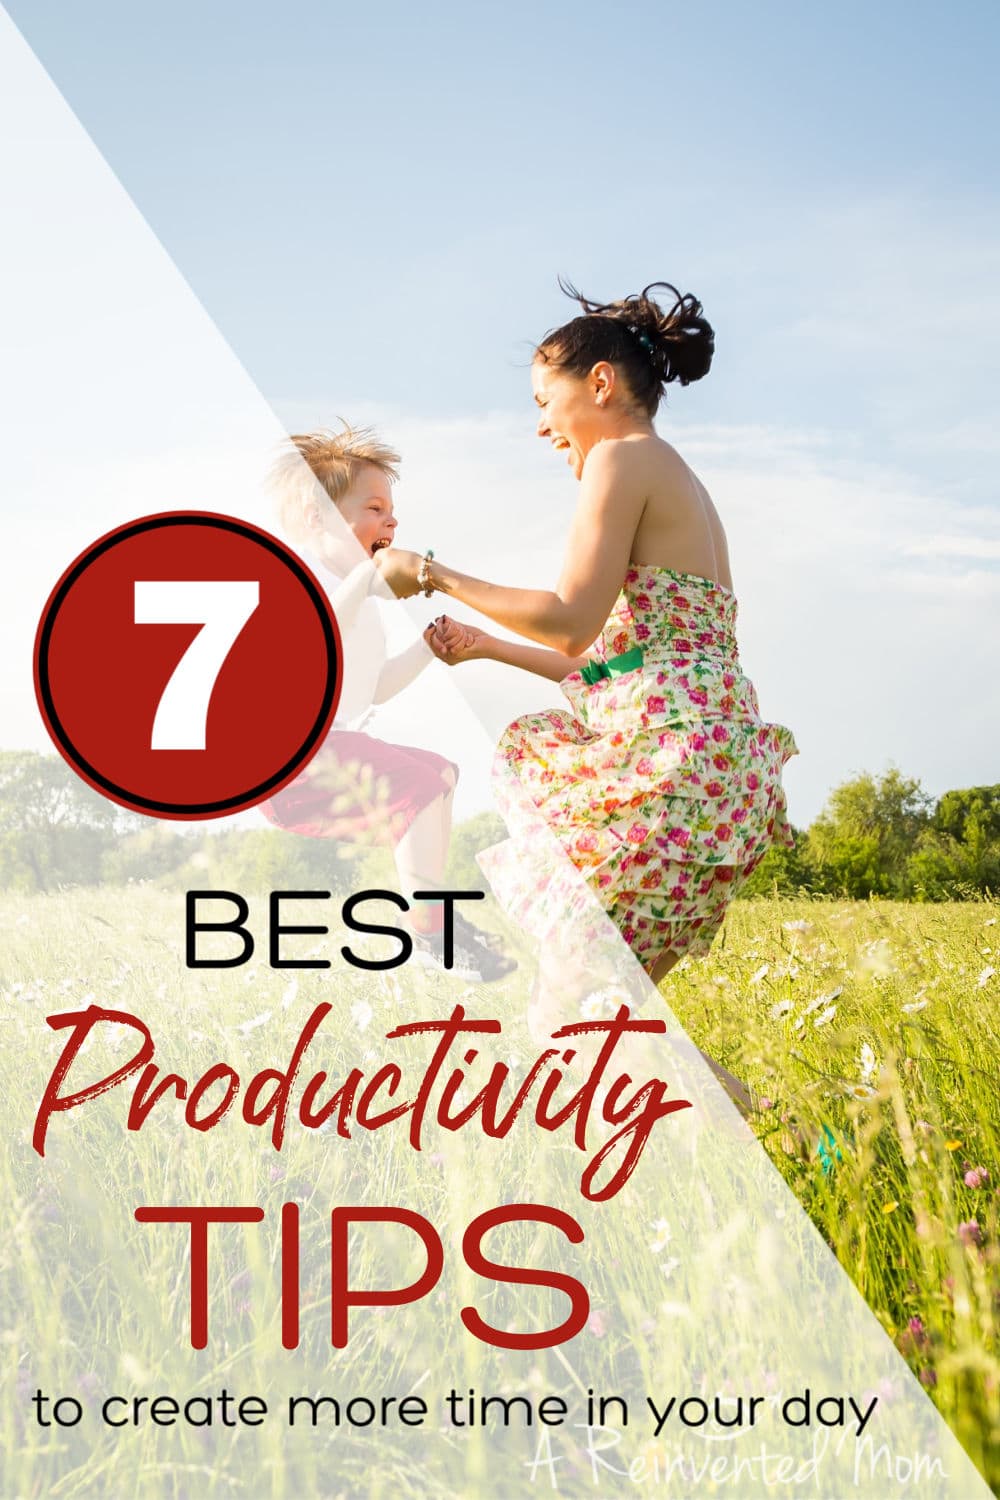 Find free time in your day with my BEST Productivity tips | A Reinvented Mom #productivity #momlife #timemanagement #areinventedmom